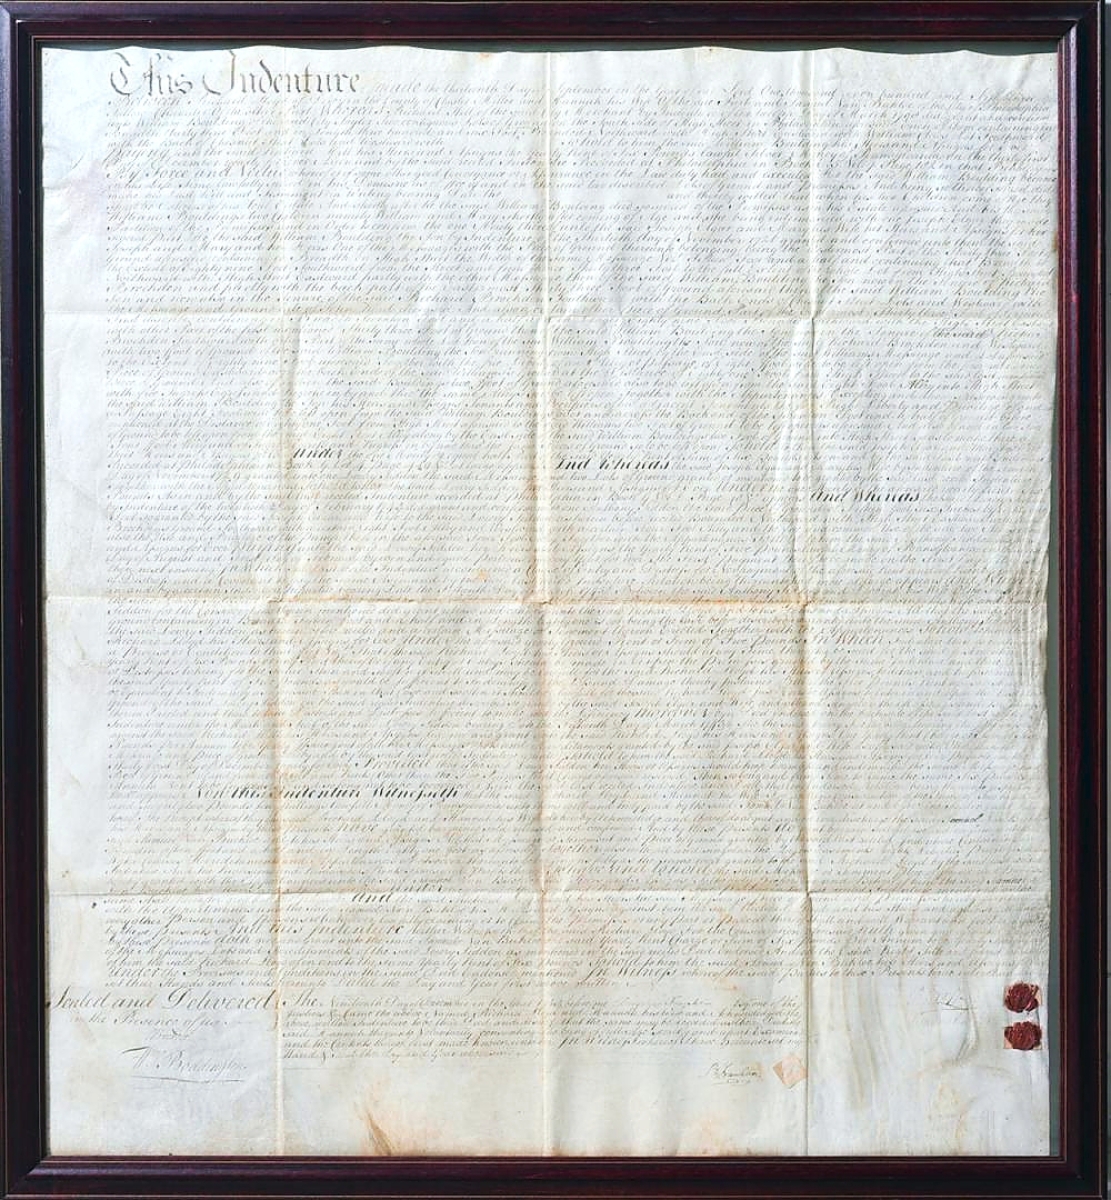 This indenture on vellum between Richard Lloyd and his wife, Hannah Lloyd, to Samuel van Burkloe for a Philadelphia property was signed twice by then Justice of the Peace, Benjamin Franklin, and dated September 13, 1753. A trade buyer paid $11,800 for it ($4/8,000).